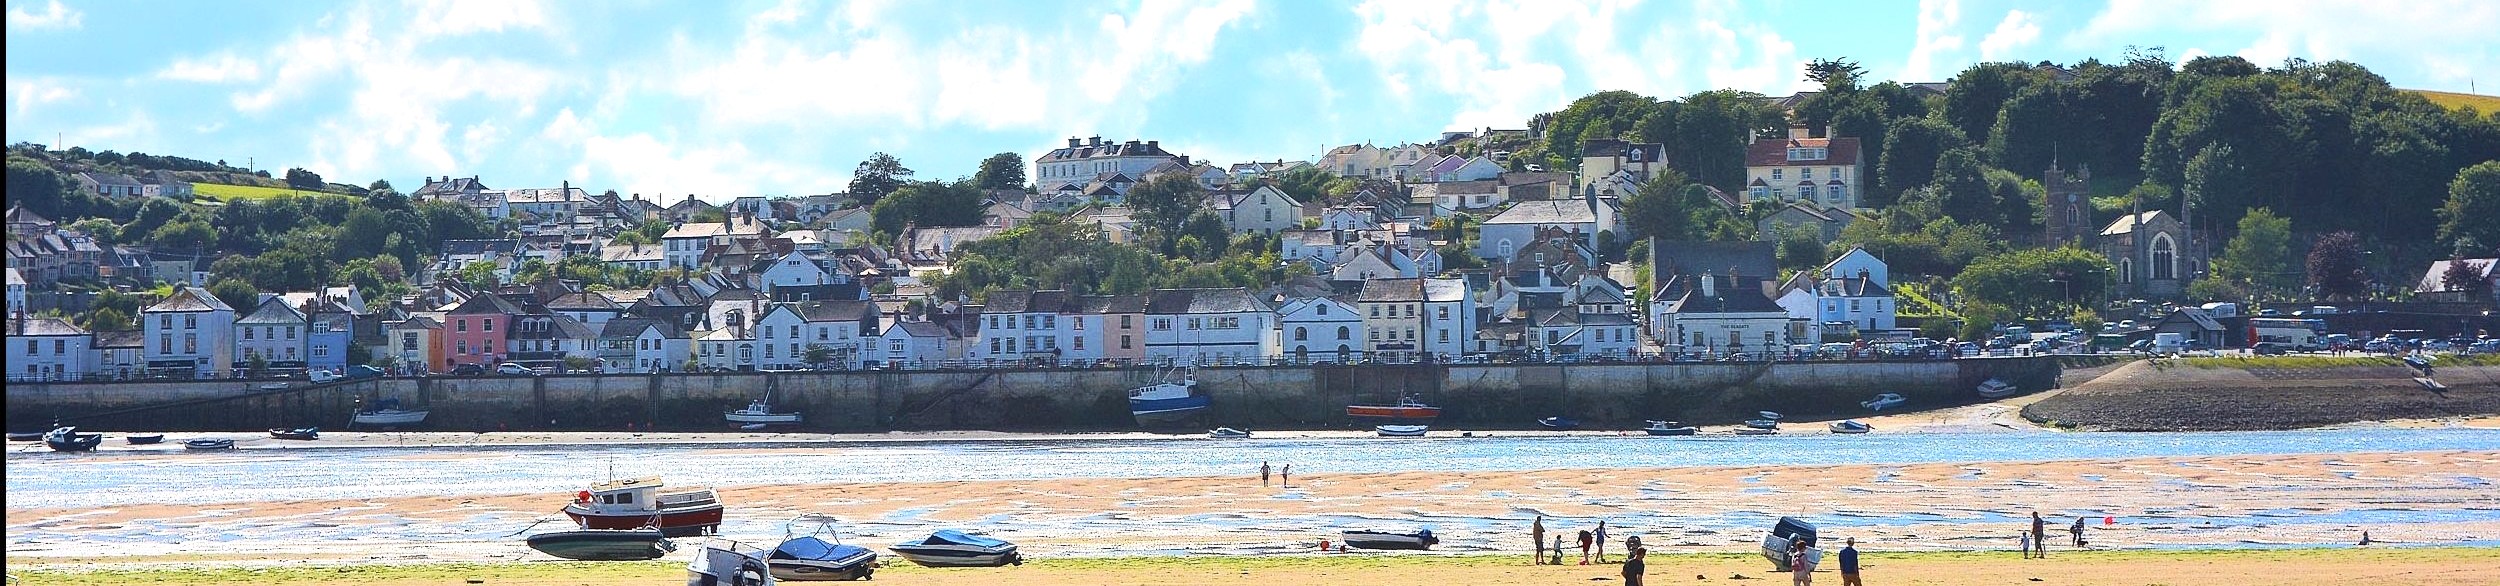 Panoramic View of Appledore from over the river at Instow